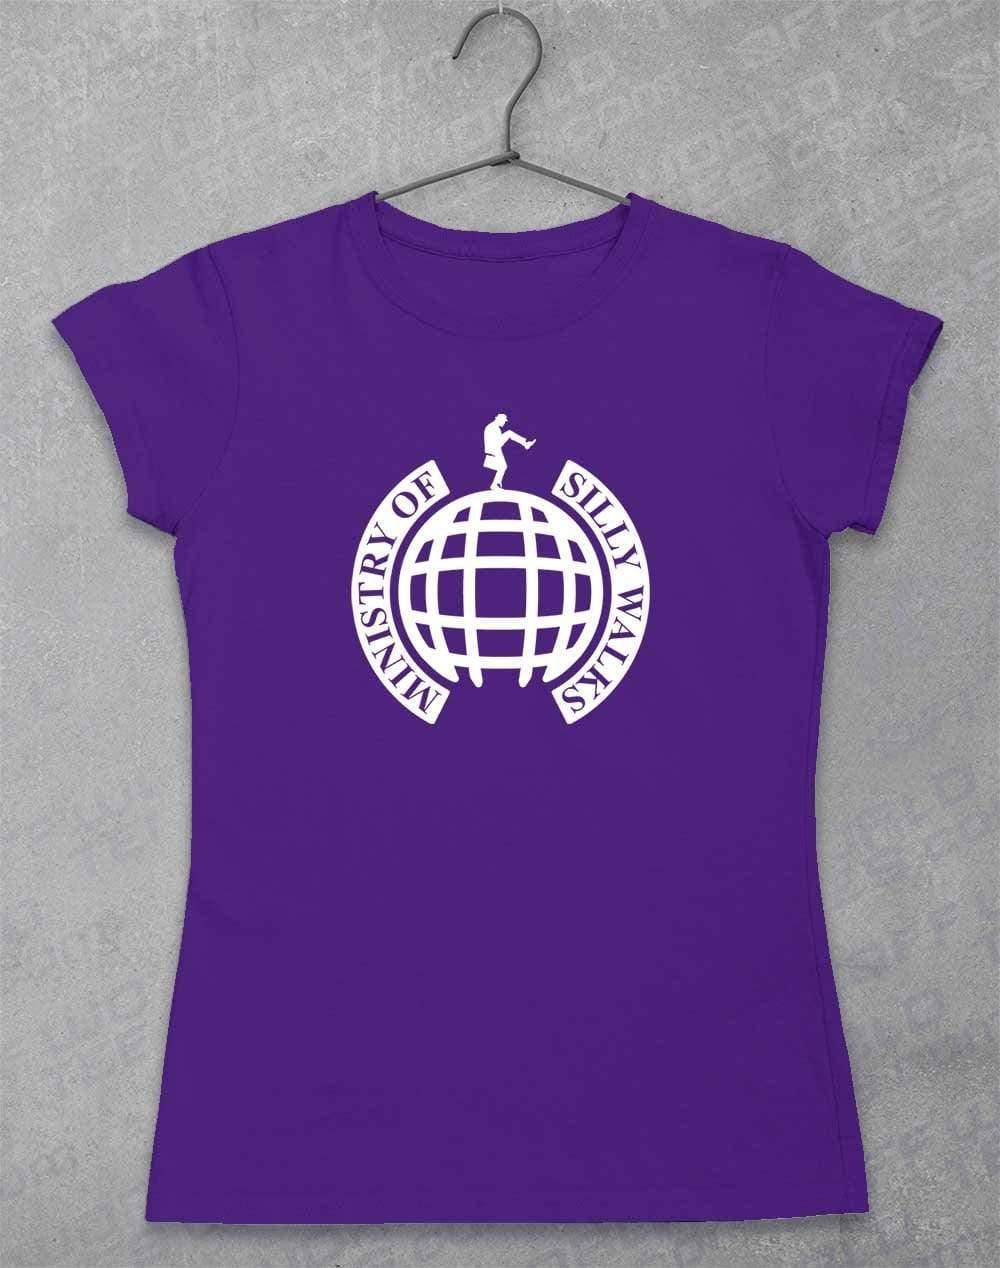 Ministry of Silly Walks Womens T-Shirt 8-10 / Lilac  - Off World Tees